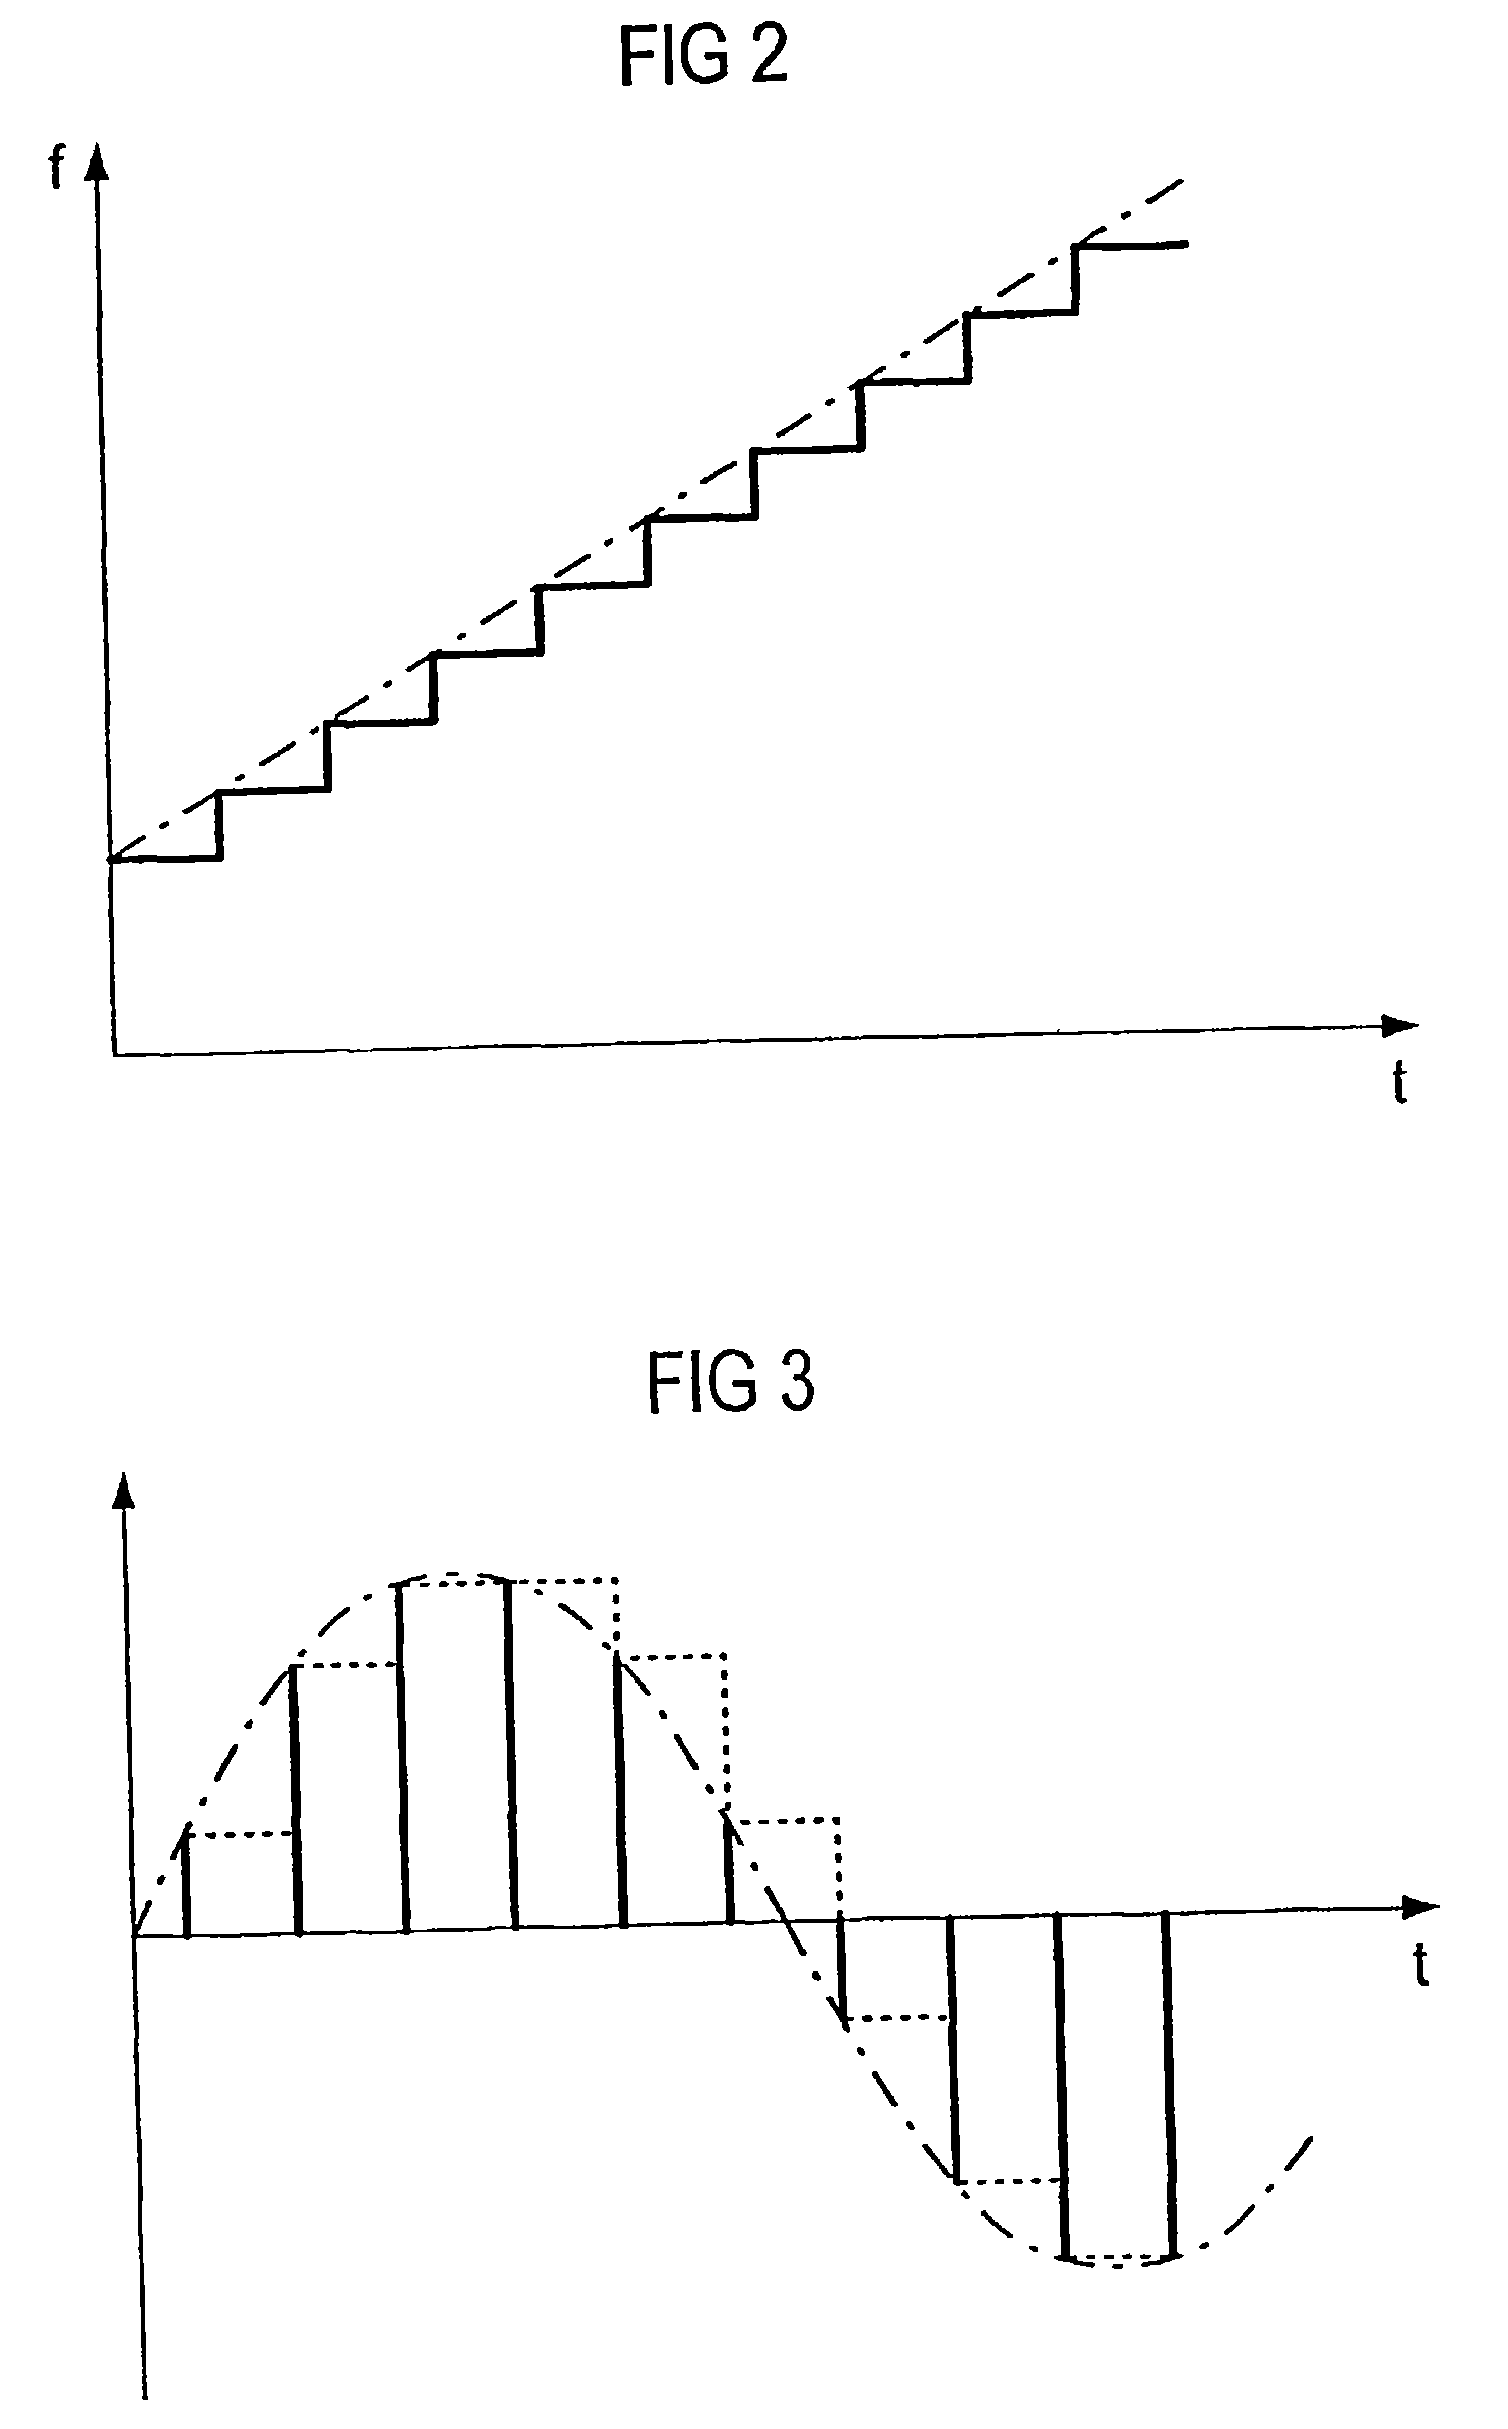 Identification system for verifying an authorization to access an object or to use an object, particularly a motor vehicle